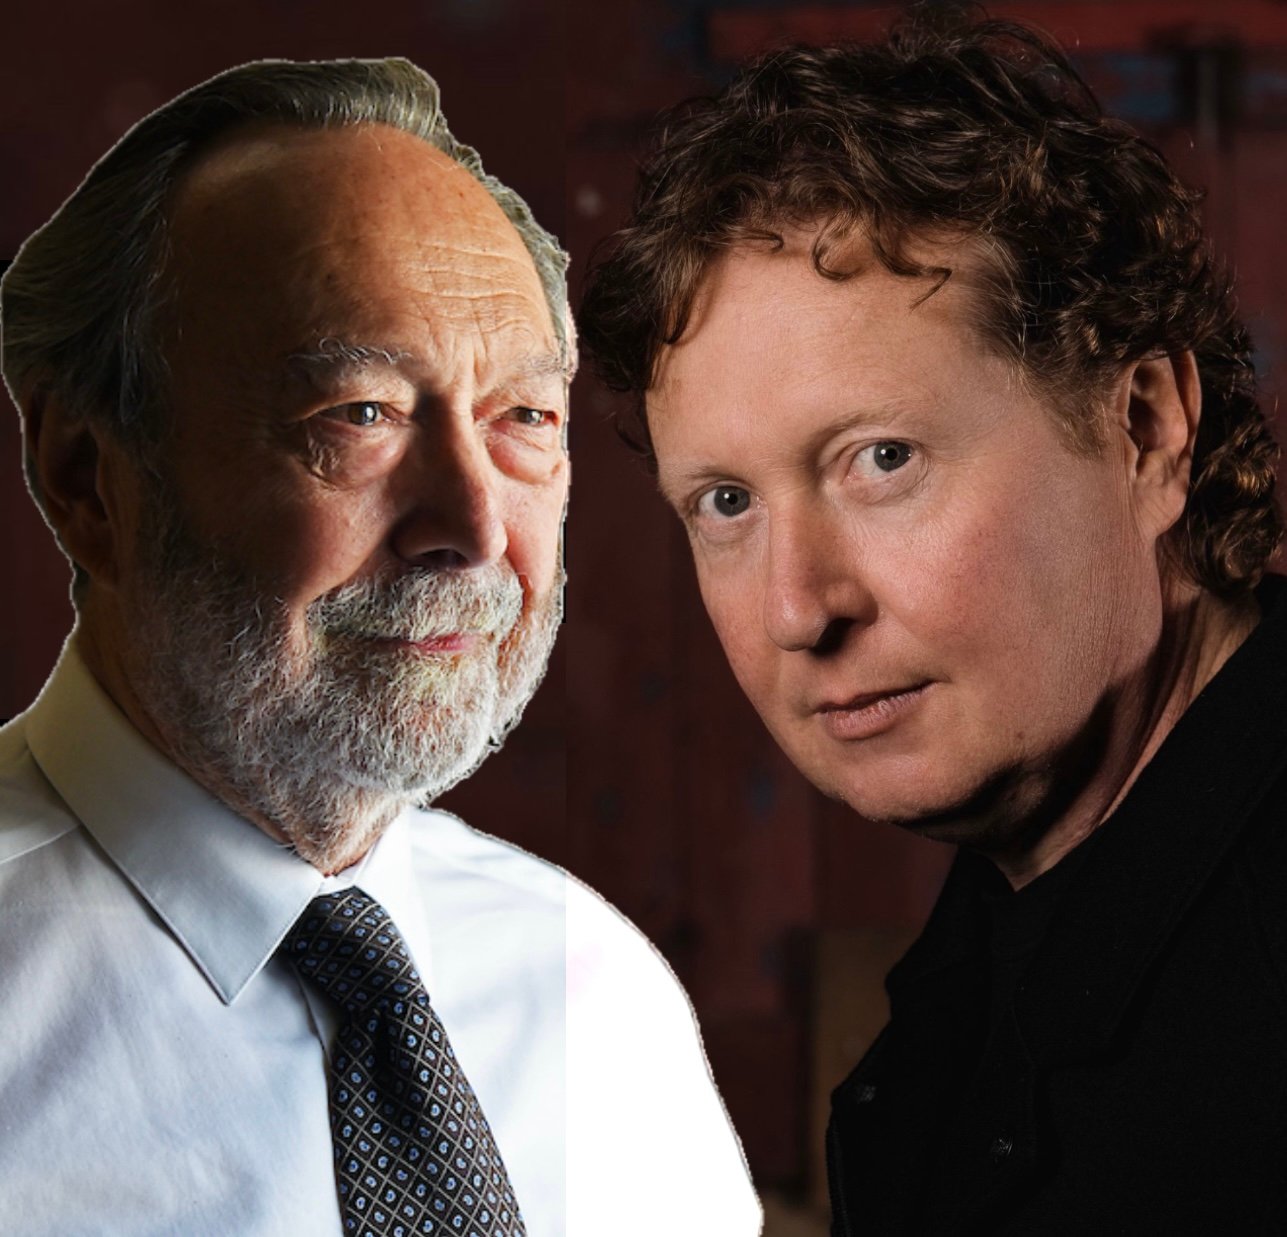 Dr Stephen Porges and Anthony Gorry